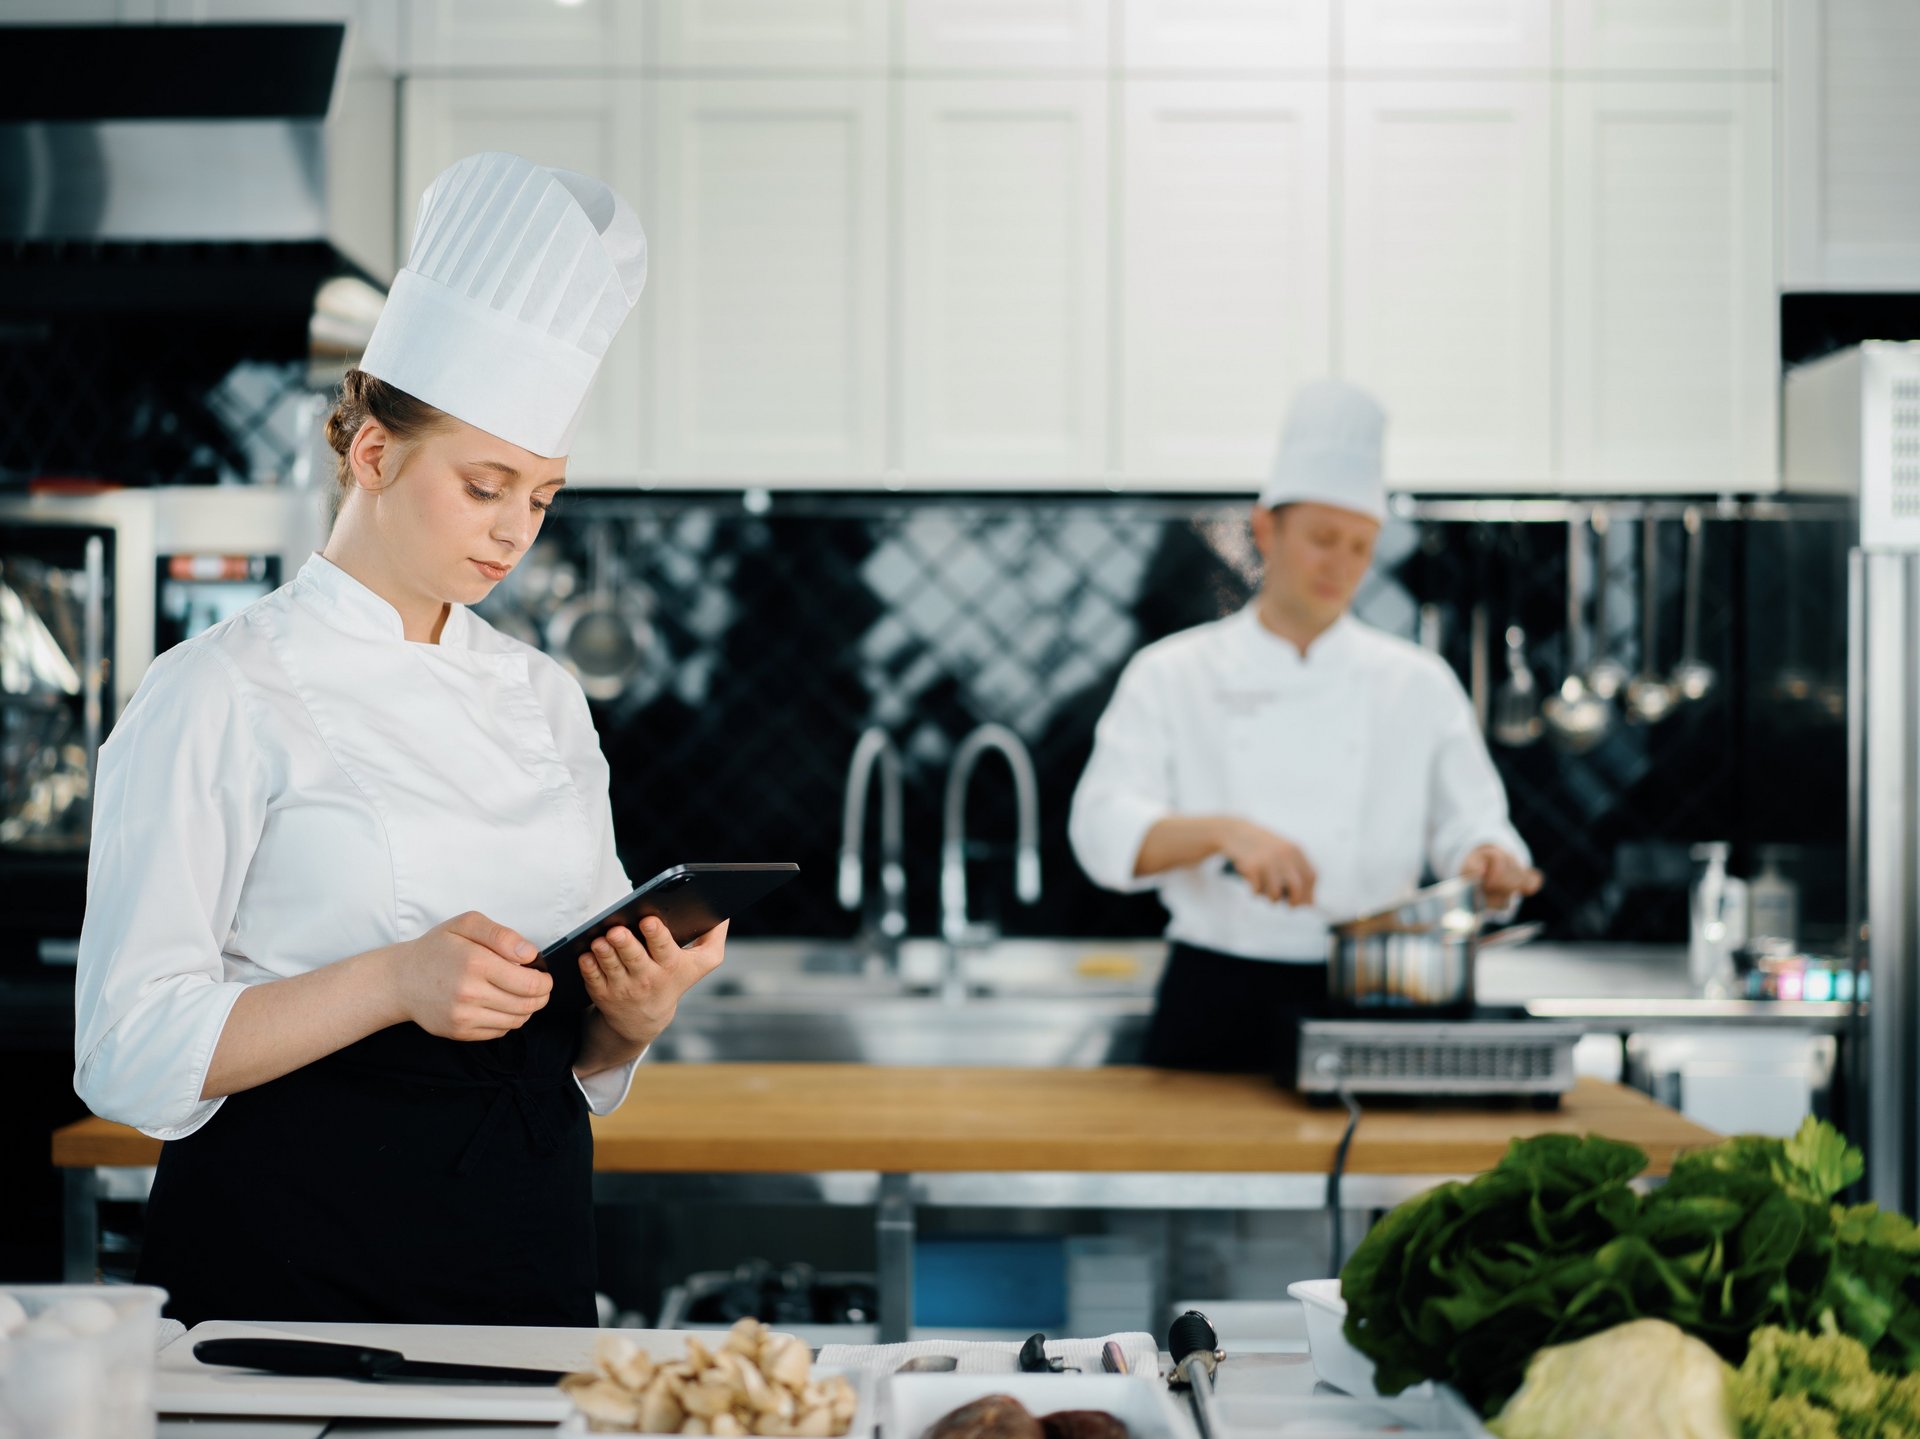 Two chefs standing in a restaurant kitchen, one is cooking and the other is using a tablet to manage digital recipes.